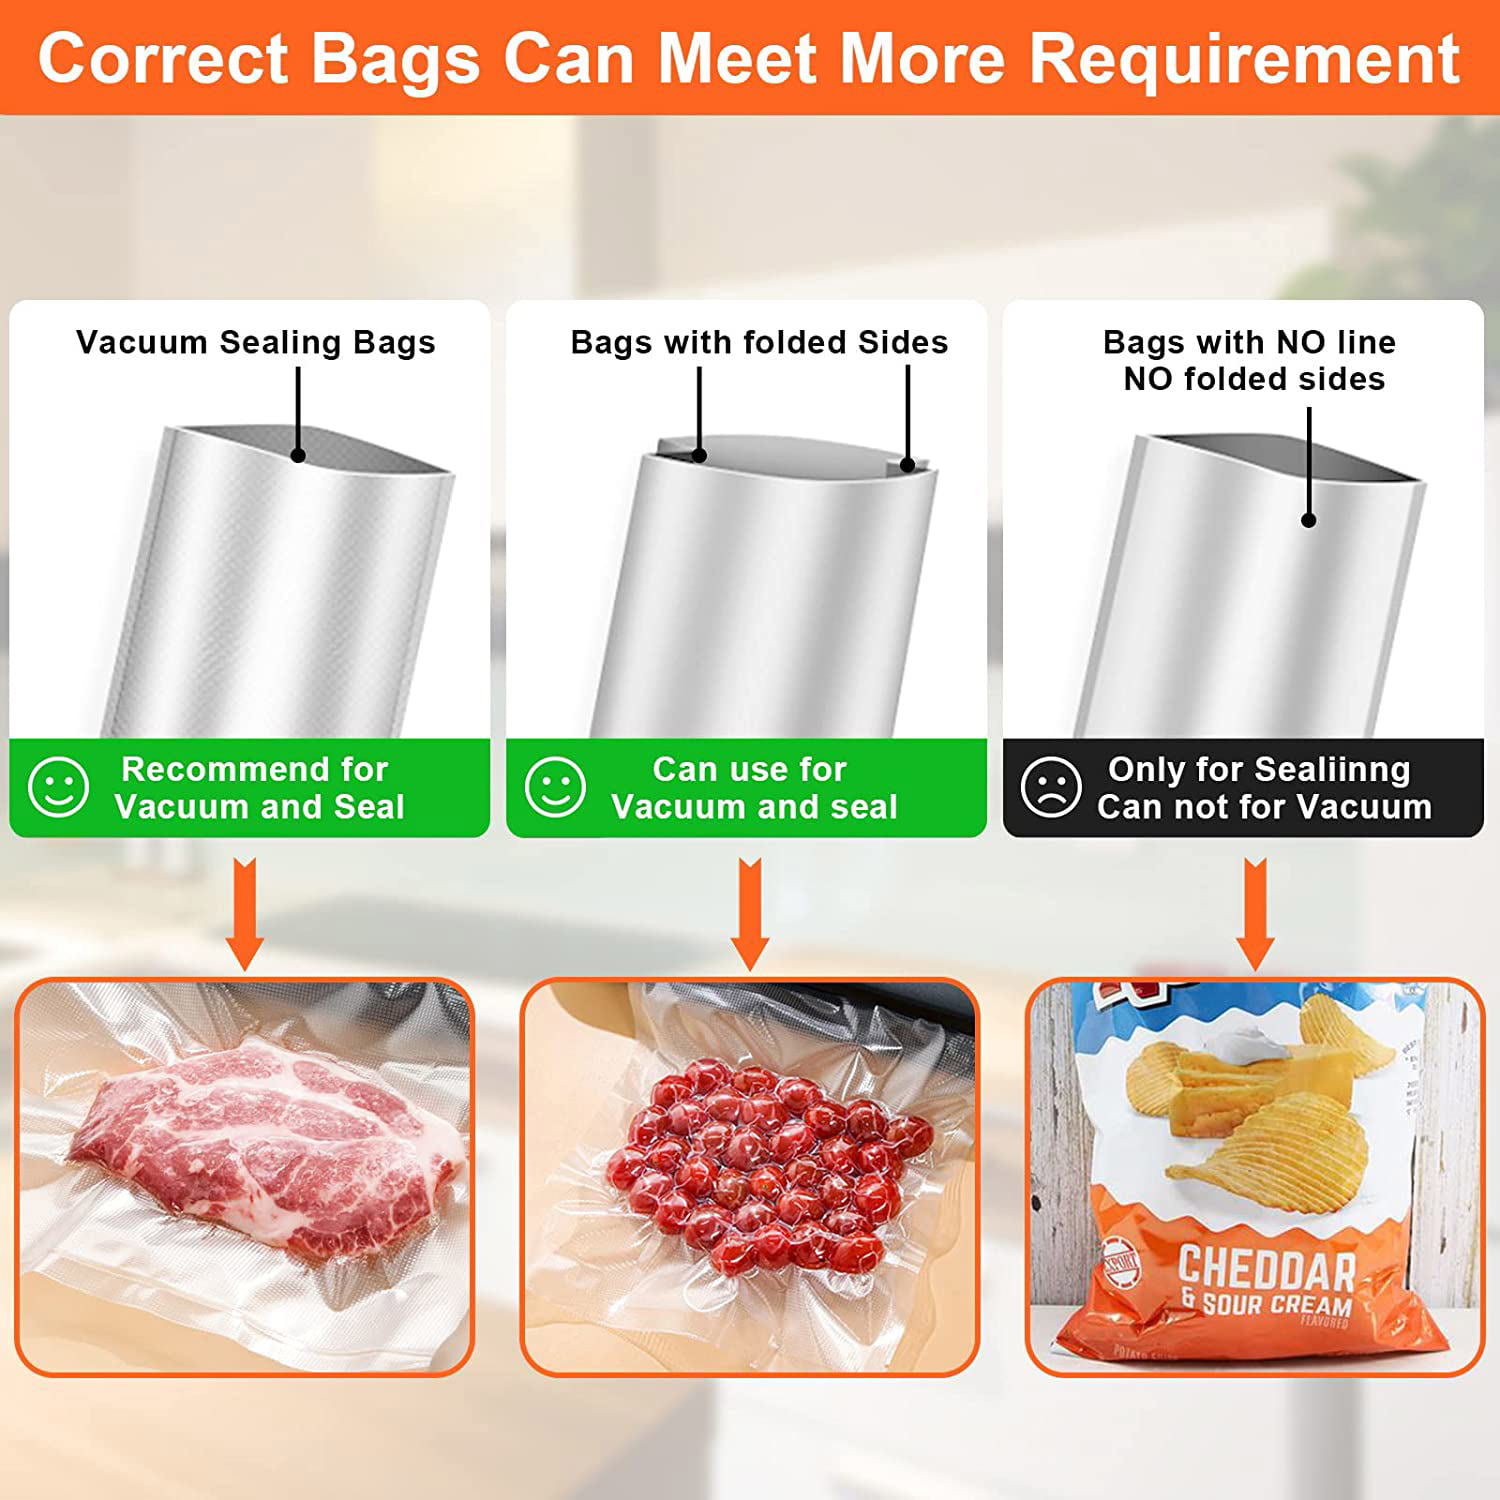 News - How to use vacuum packaging bags correctly